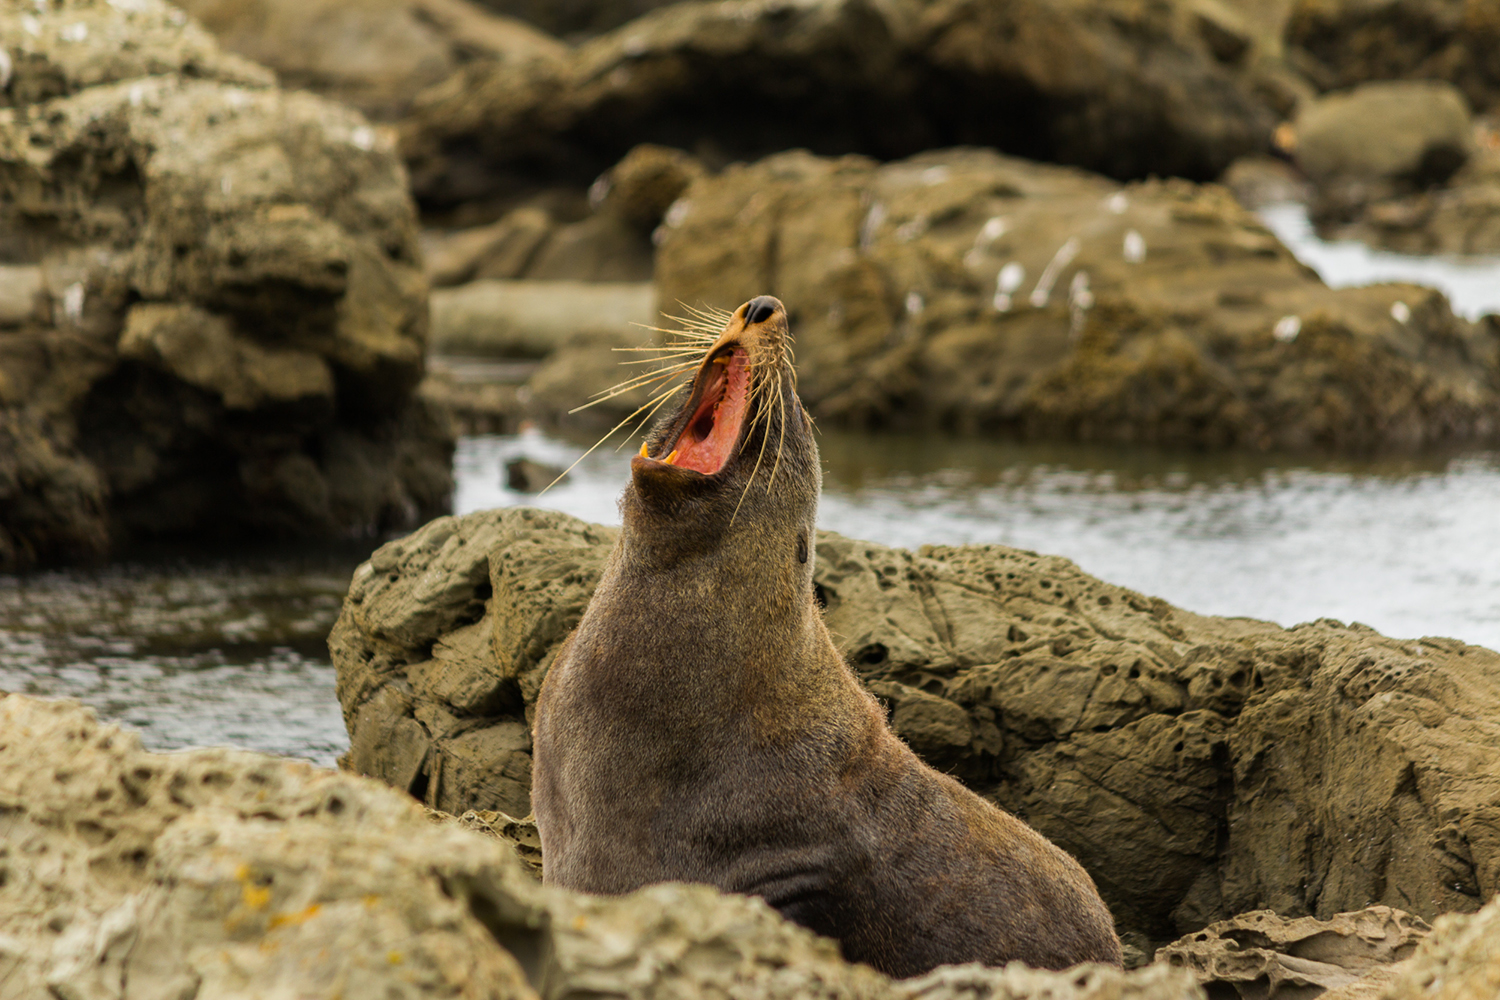 Take the plunge with fur seals in Kaikoura, New Zealand. Image by Anup Shah / CC BY-SA 2.0